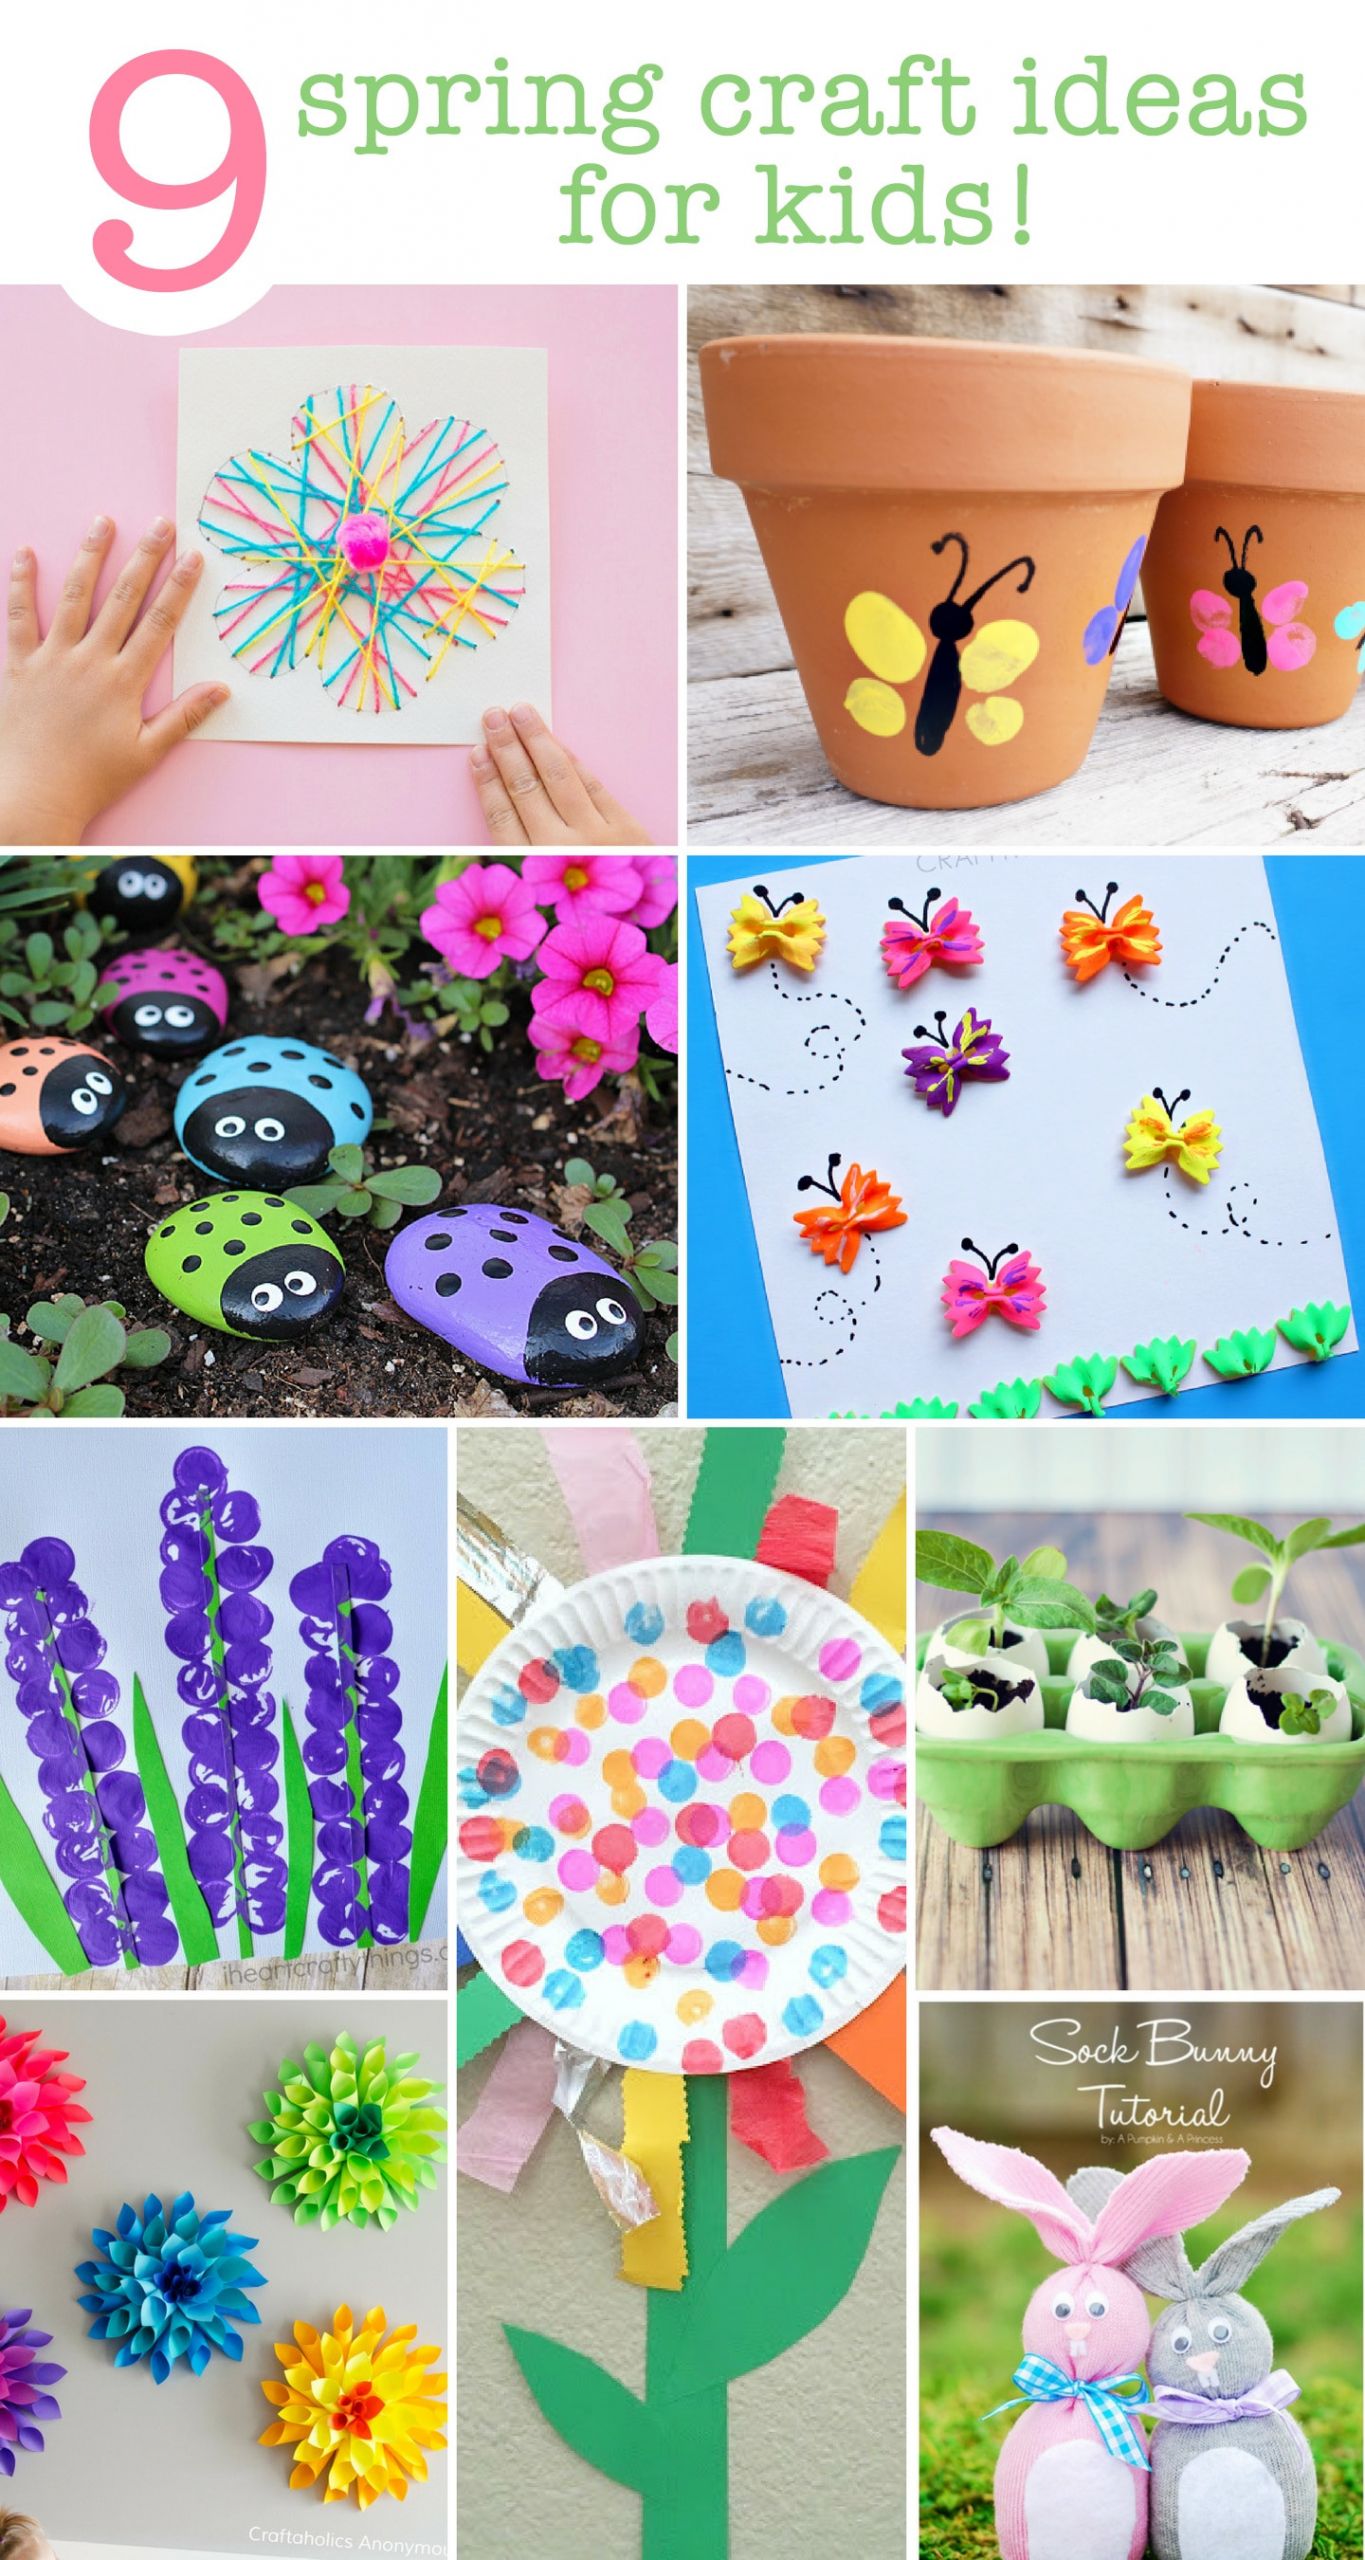 Craft Projects For Toddlers
 9 Spring Craft Ideas For The Kids